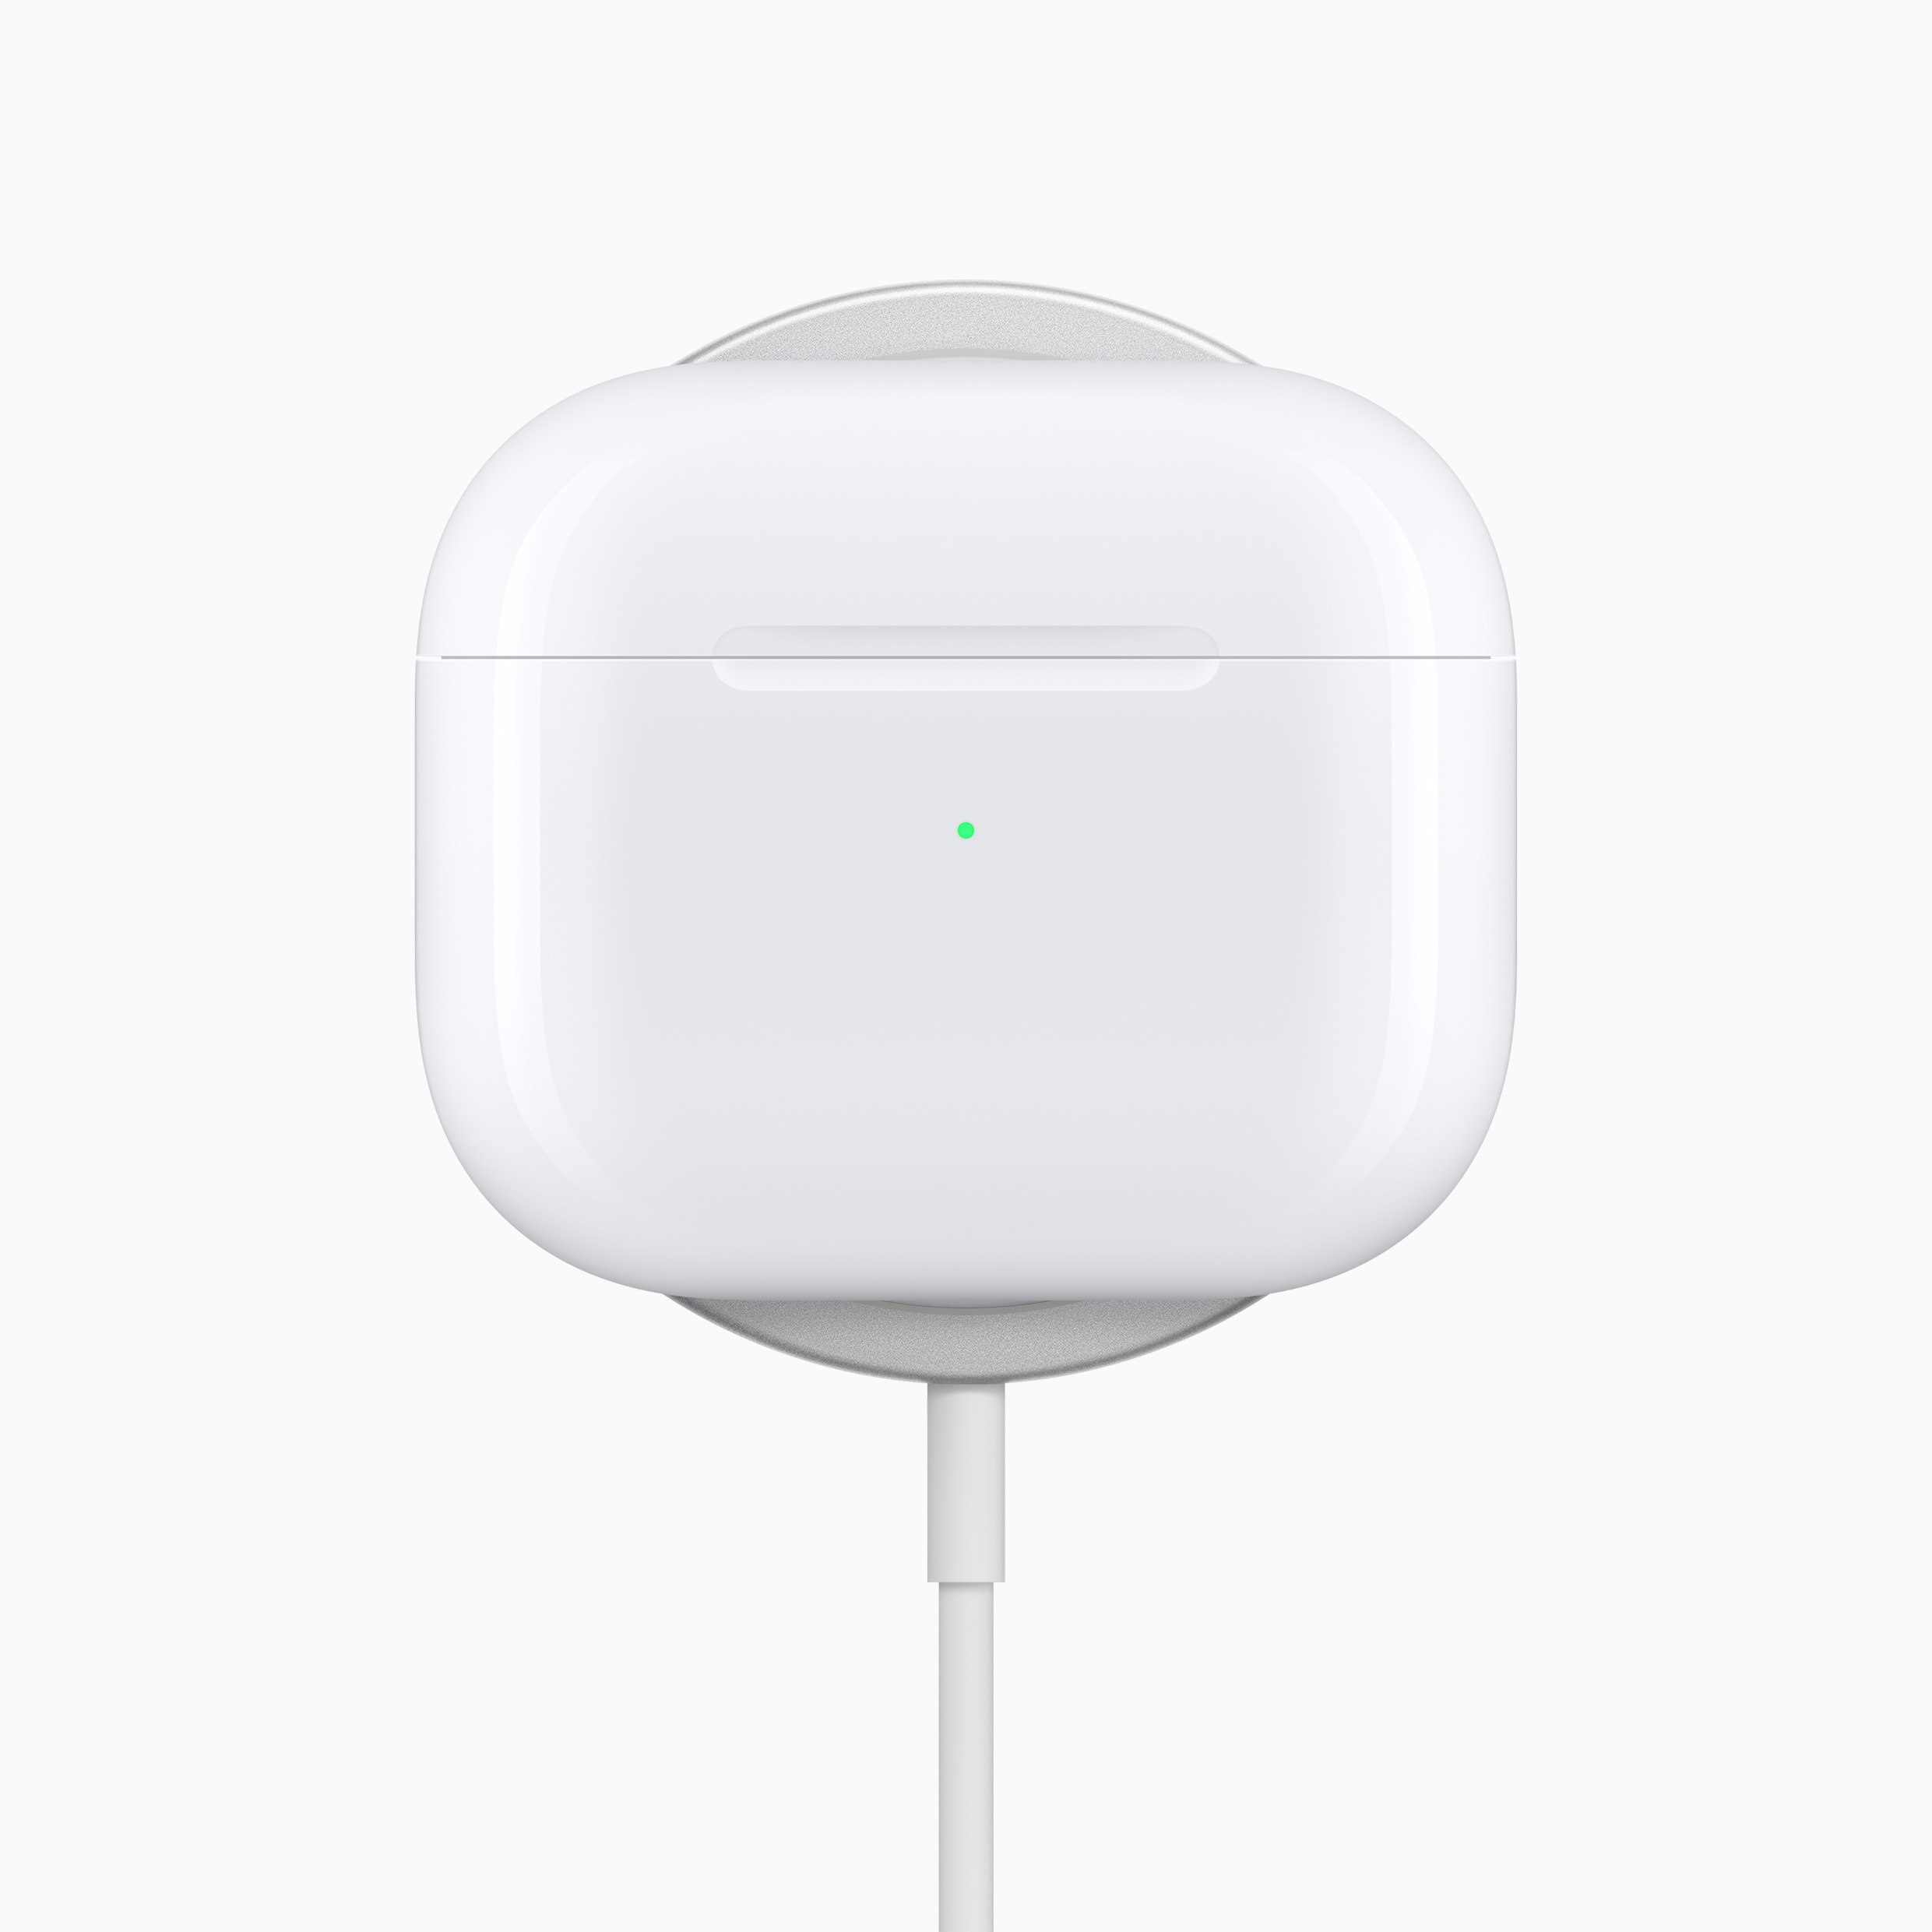 Introducing the next generation of AirPods - Apple (BG)